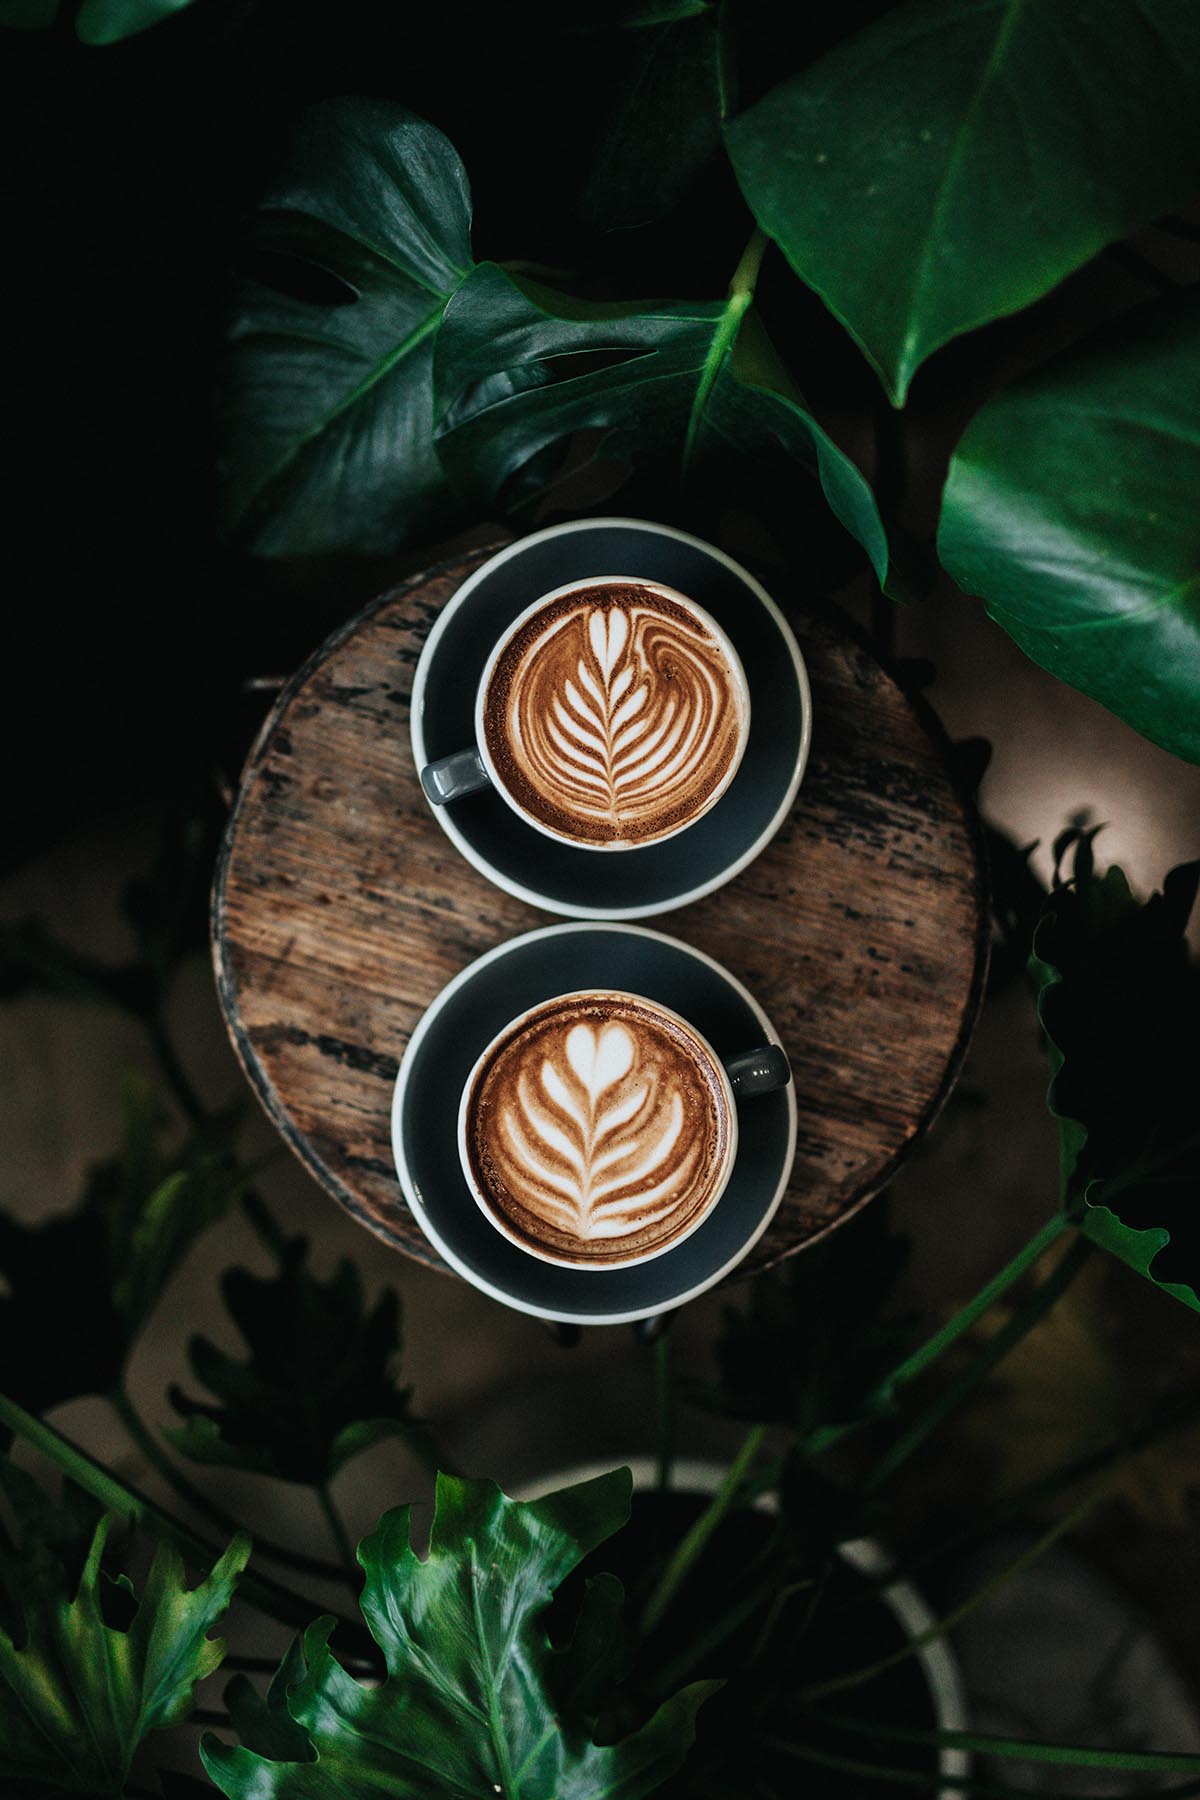 Two cappuccinos with flower designs in the foam against a dark wooden background.